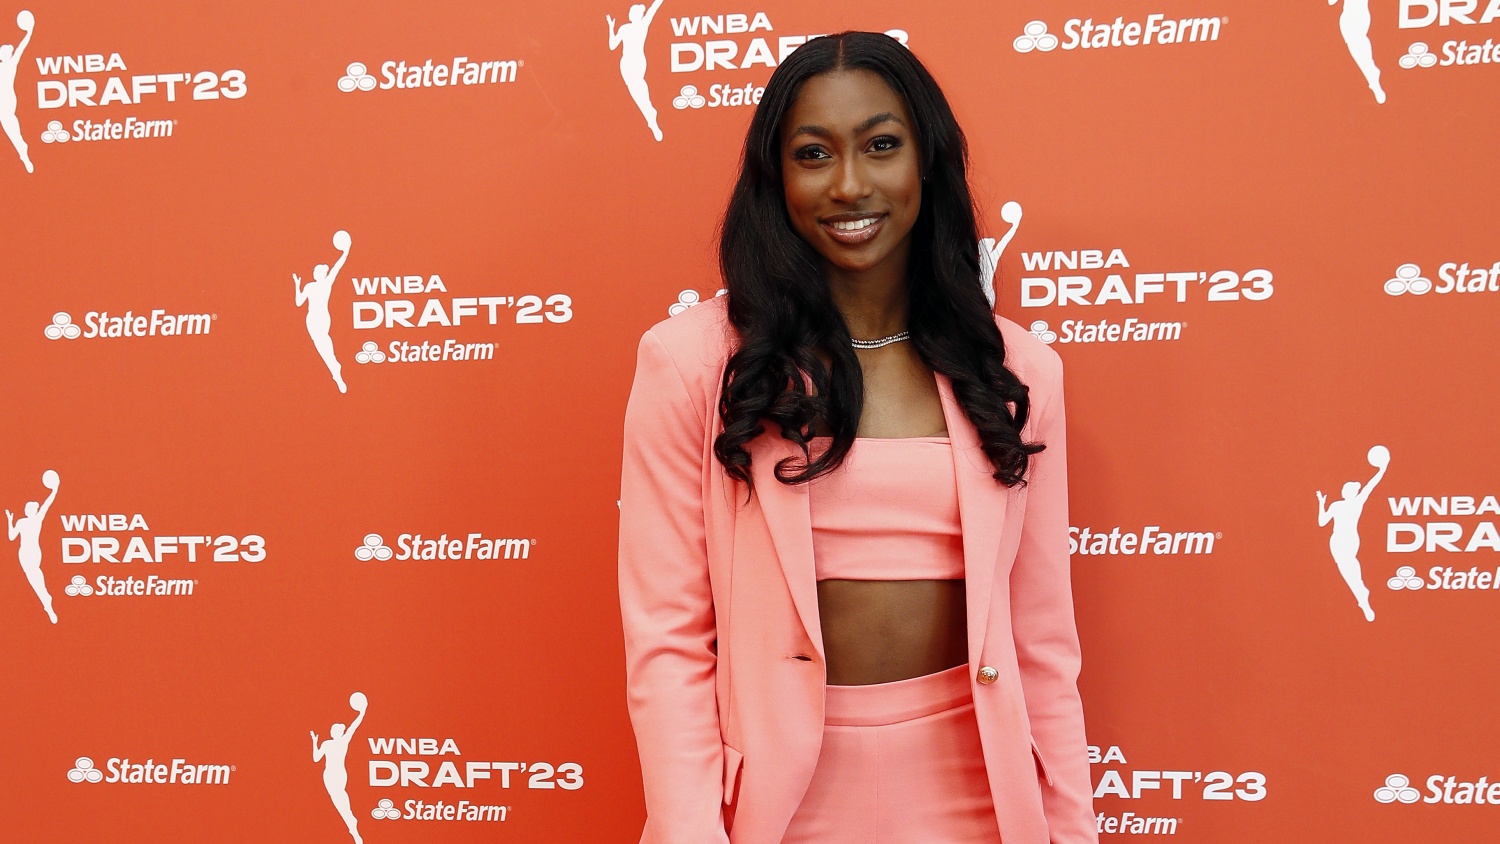 Meet The Top Picks From The WNBA Draft